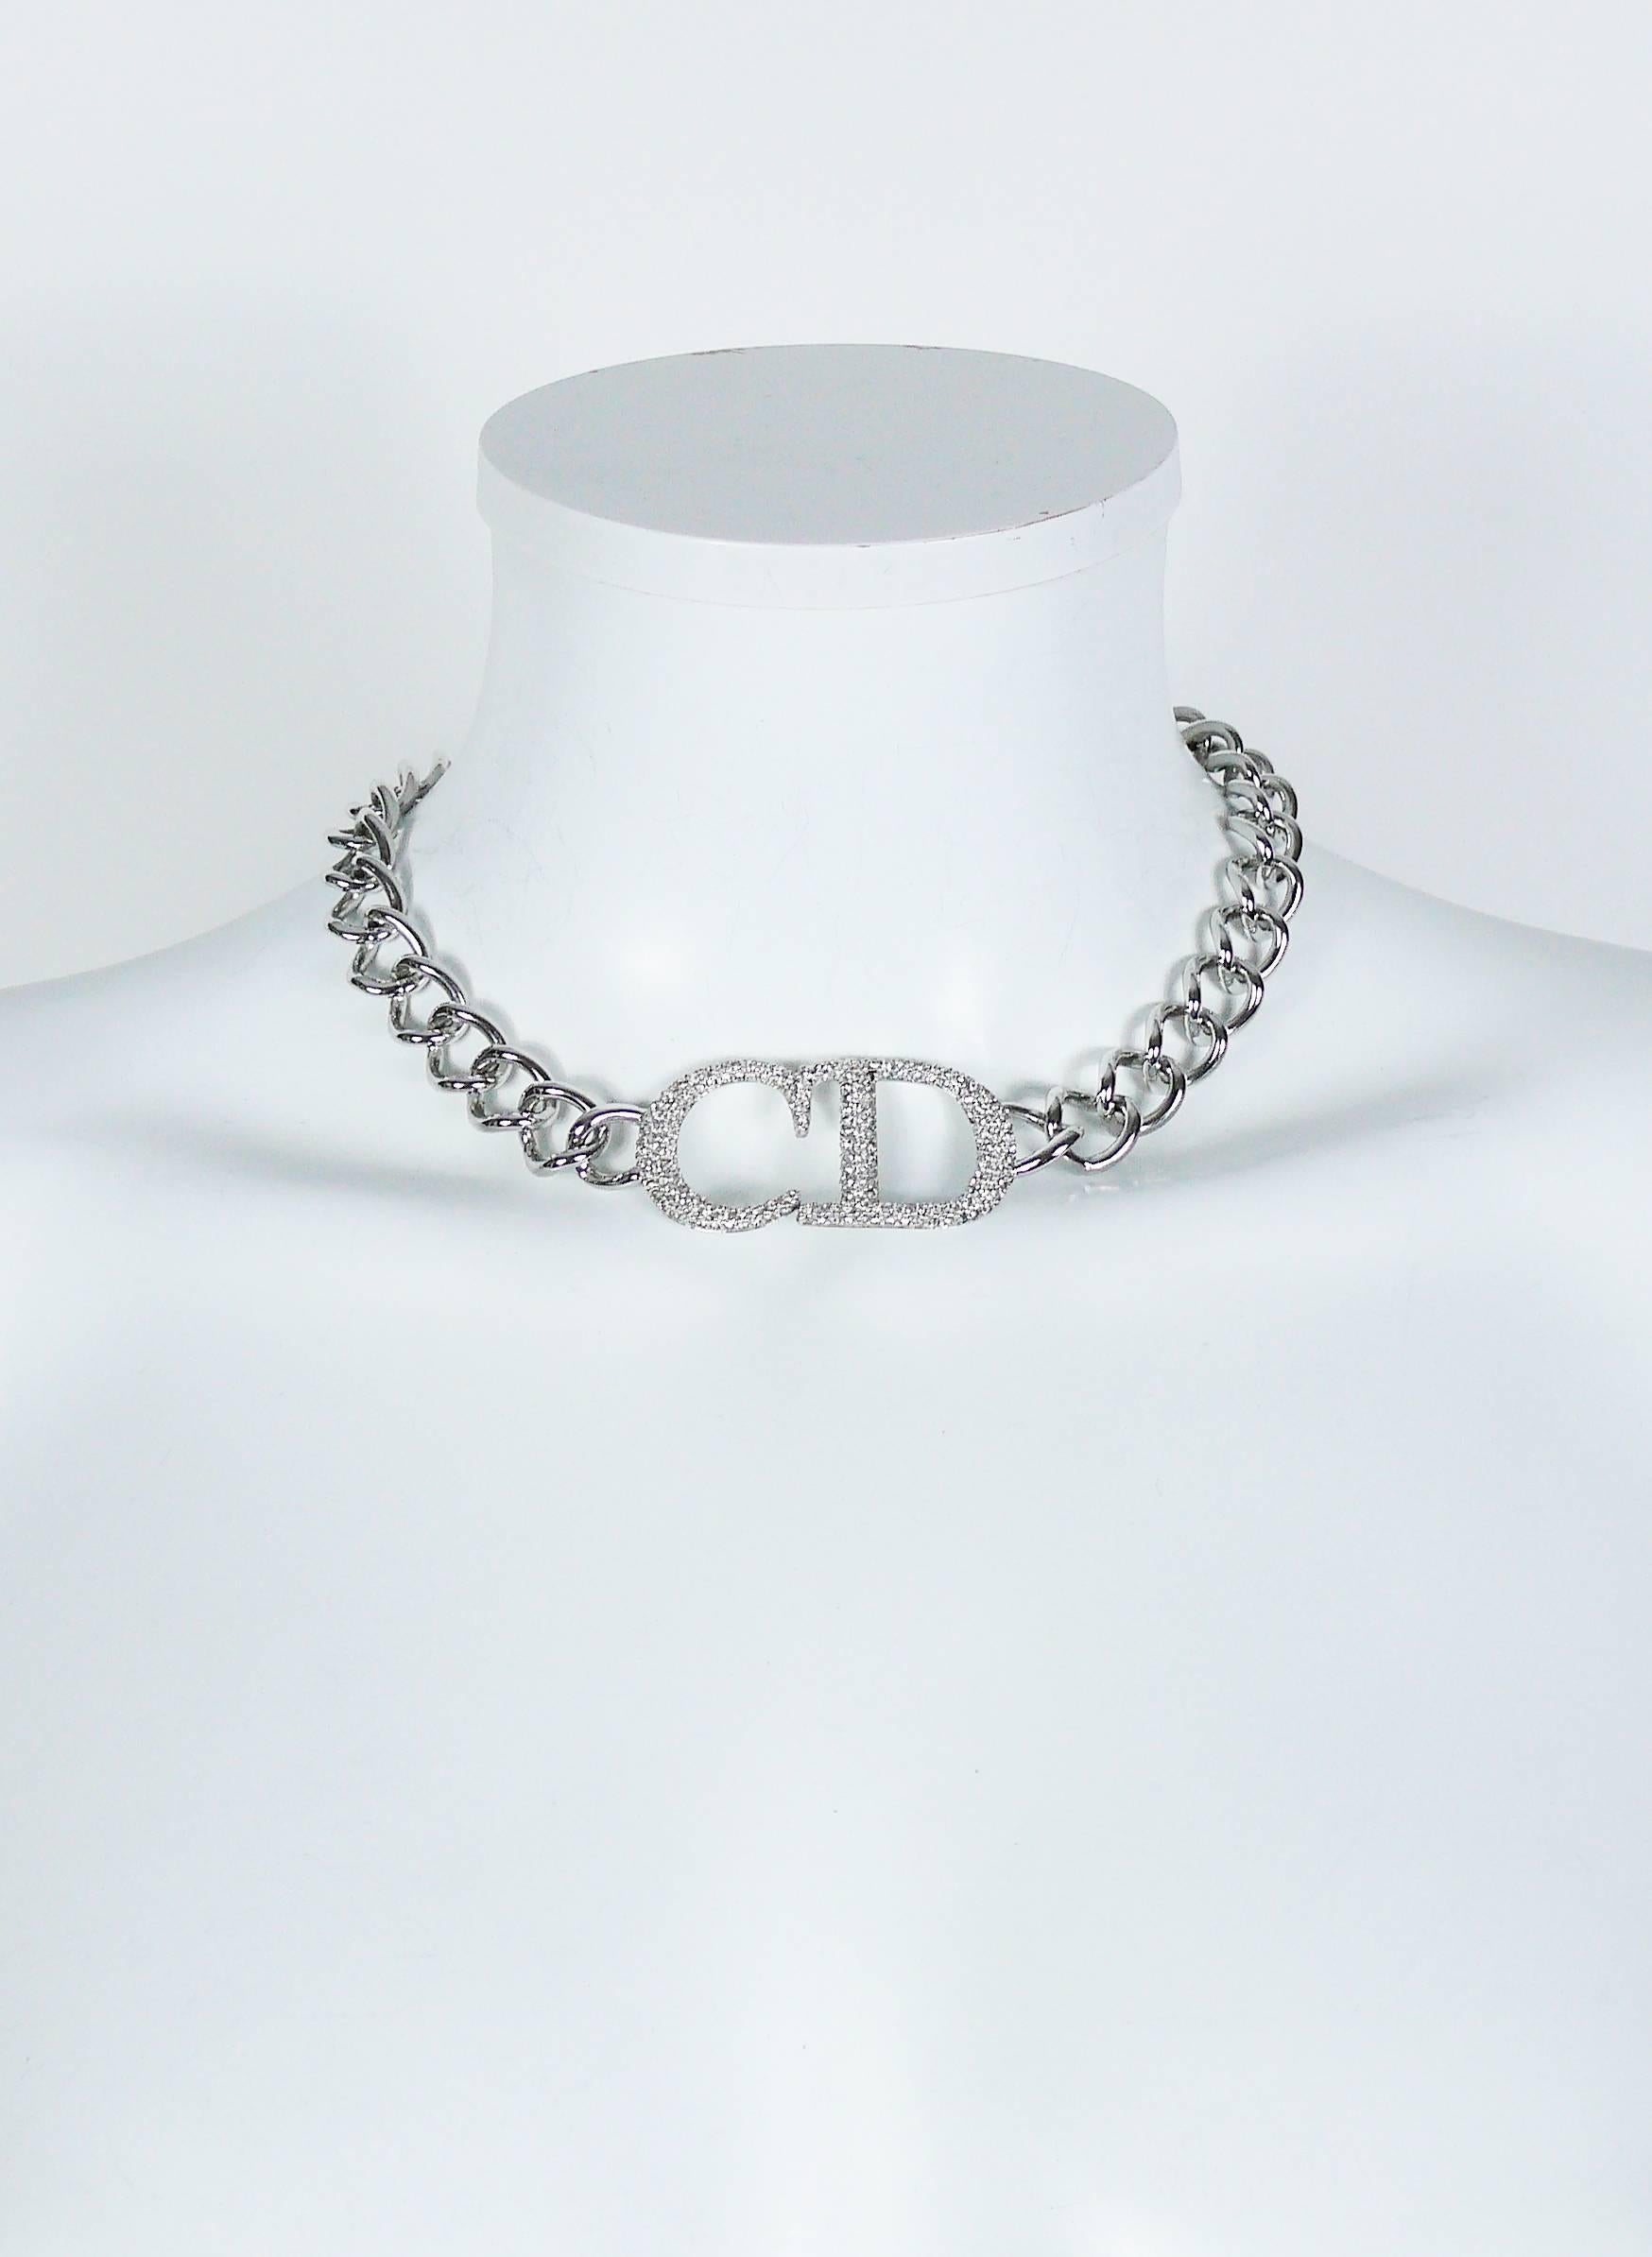 CHRISTIAN DIOR silver toned curb chain necklace featuring a CD monogram charm embellished with clear crystals.

Hook clasp closure.
Adjustable length (can be worn with various length / see examples on photos).

Marked DIOR © near the hook clasp and